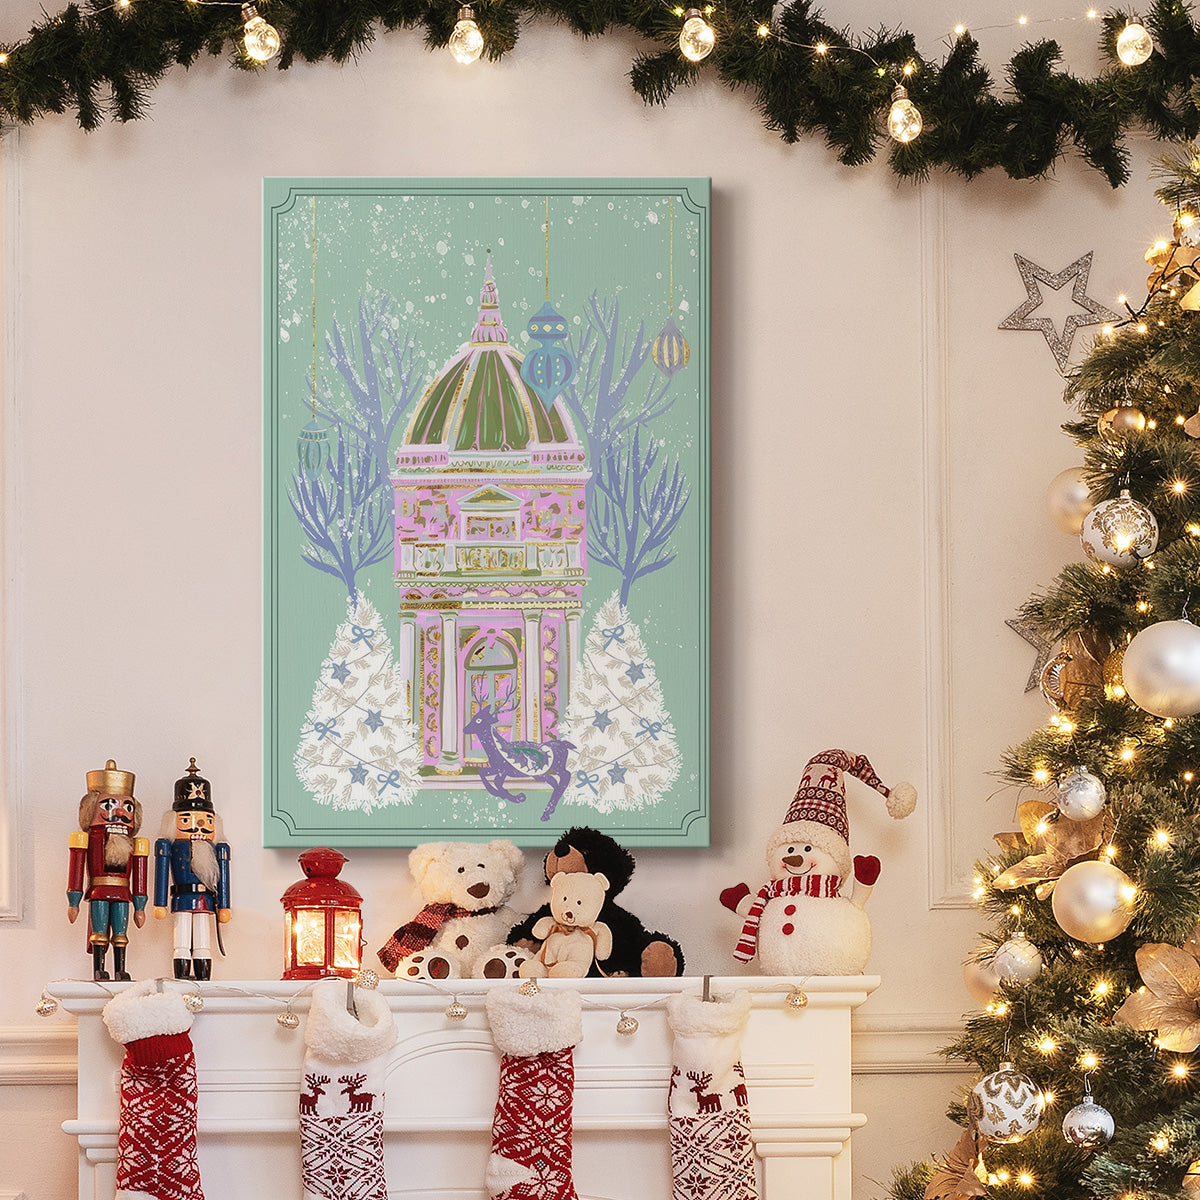 Winter Holidays IV - Gallery Wrapped Canvas